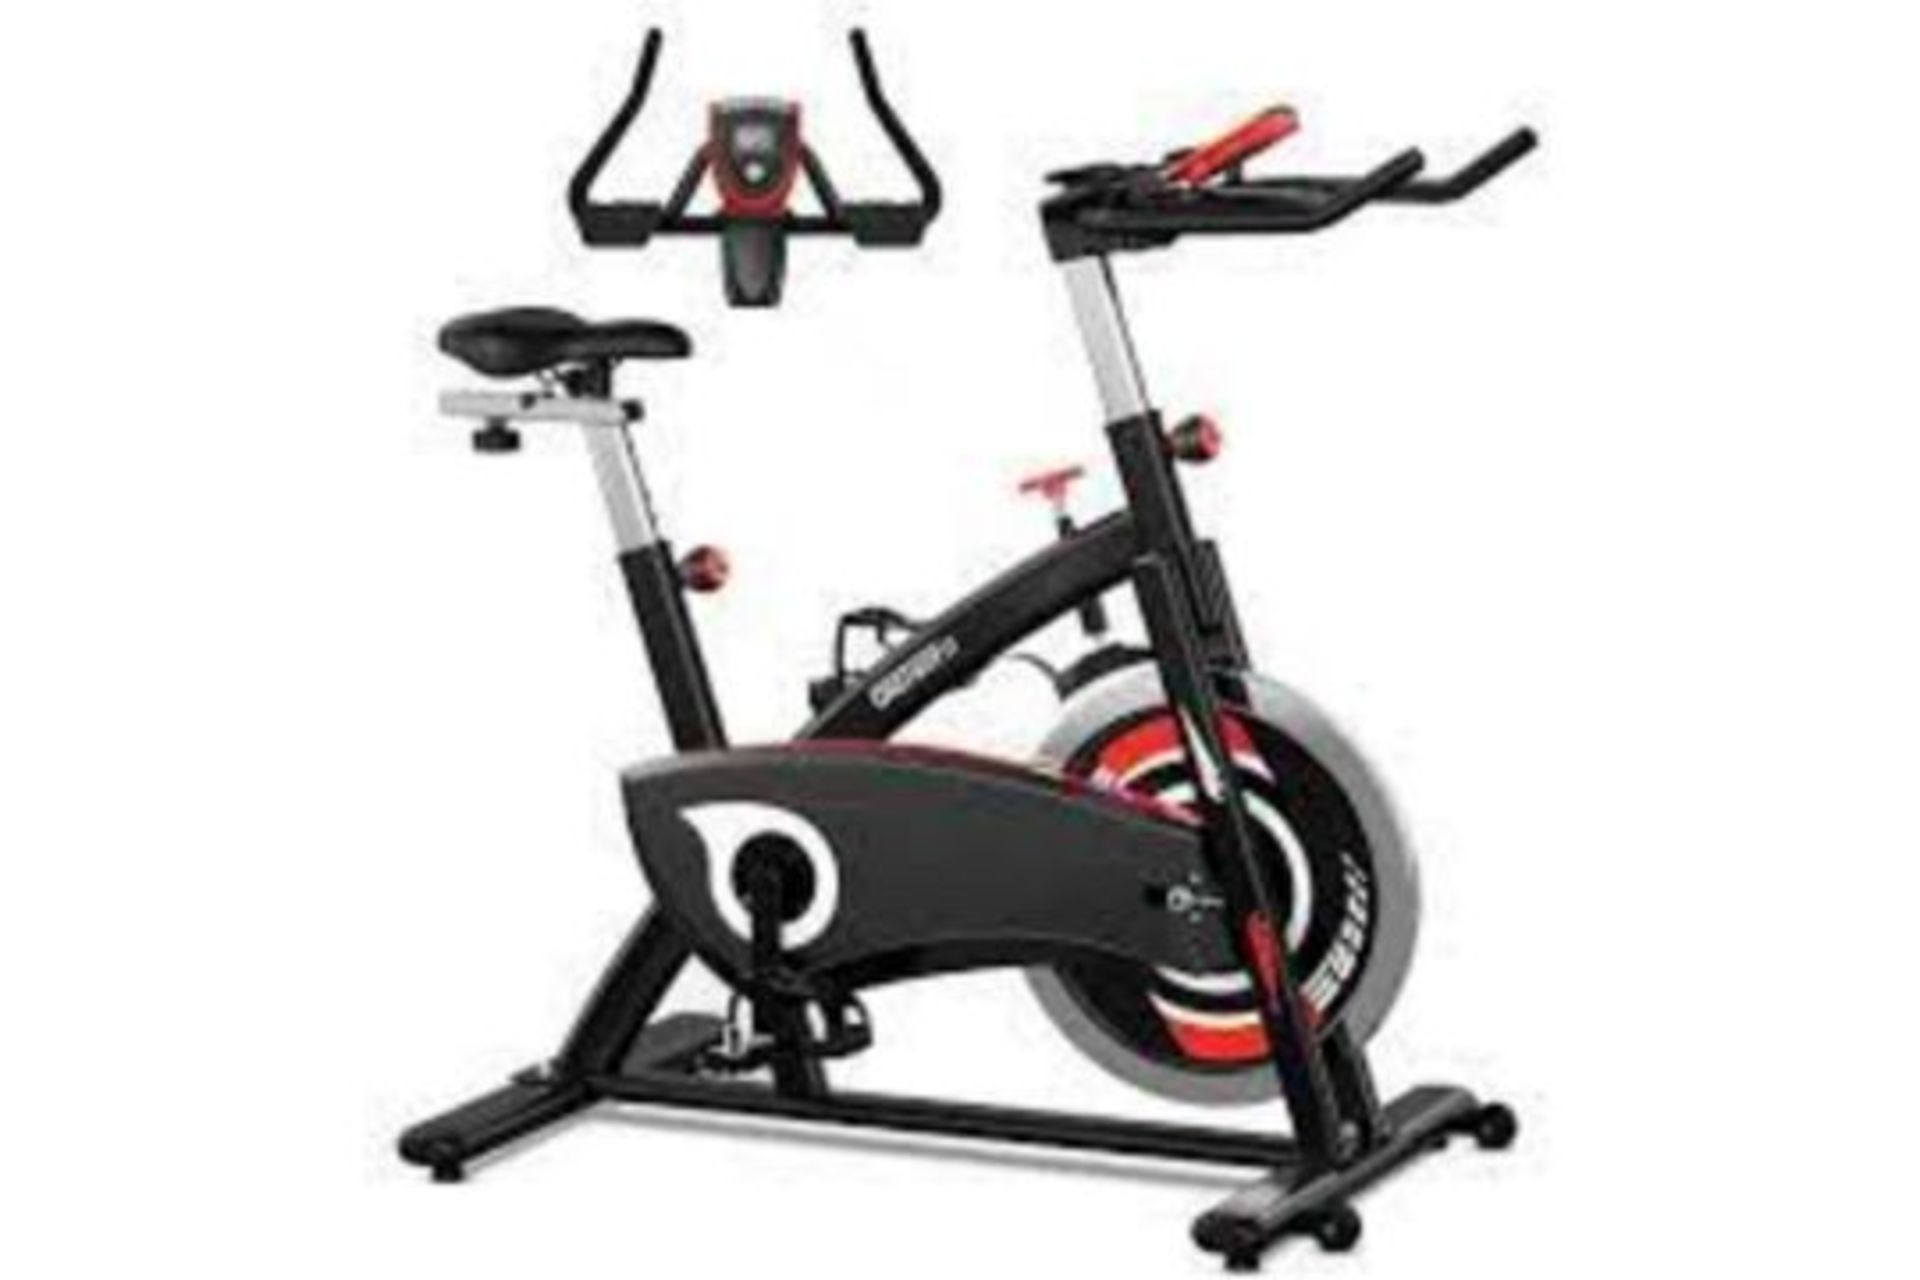 BRAND NEW ONETWOFIT EXERCISE BIKE, INDOOR CYCLING BIKE WITH 44LBS FLYWHEEL, SILENT BELT DRIVE,